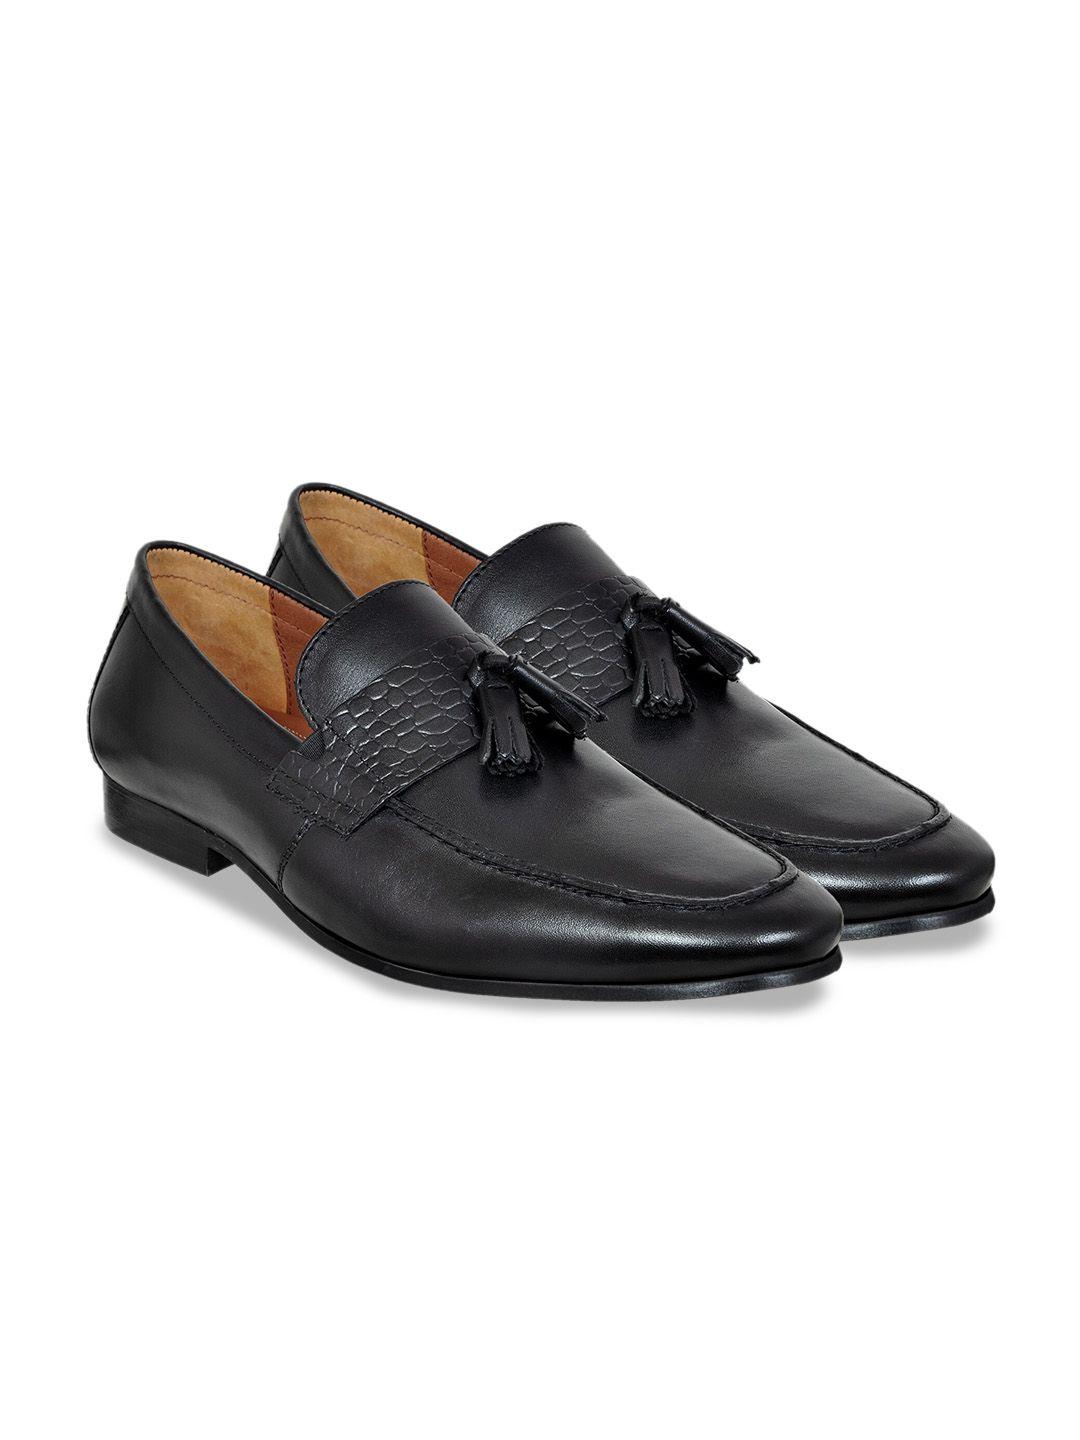 hx london men textured leather formal loafers